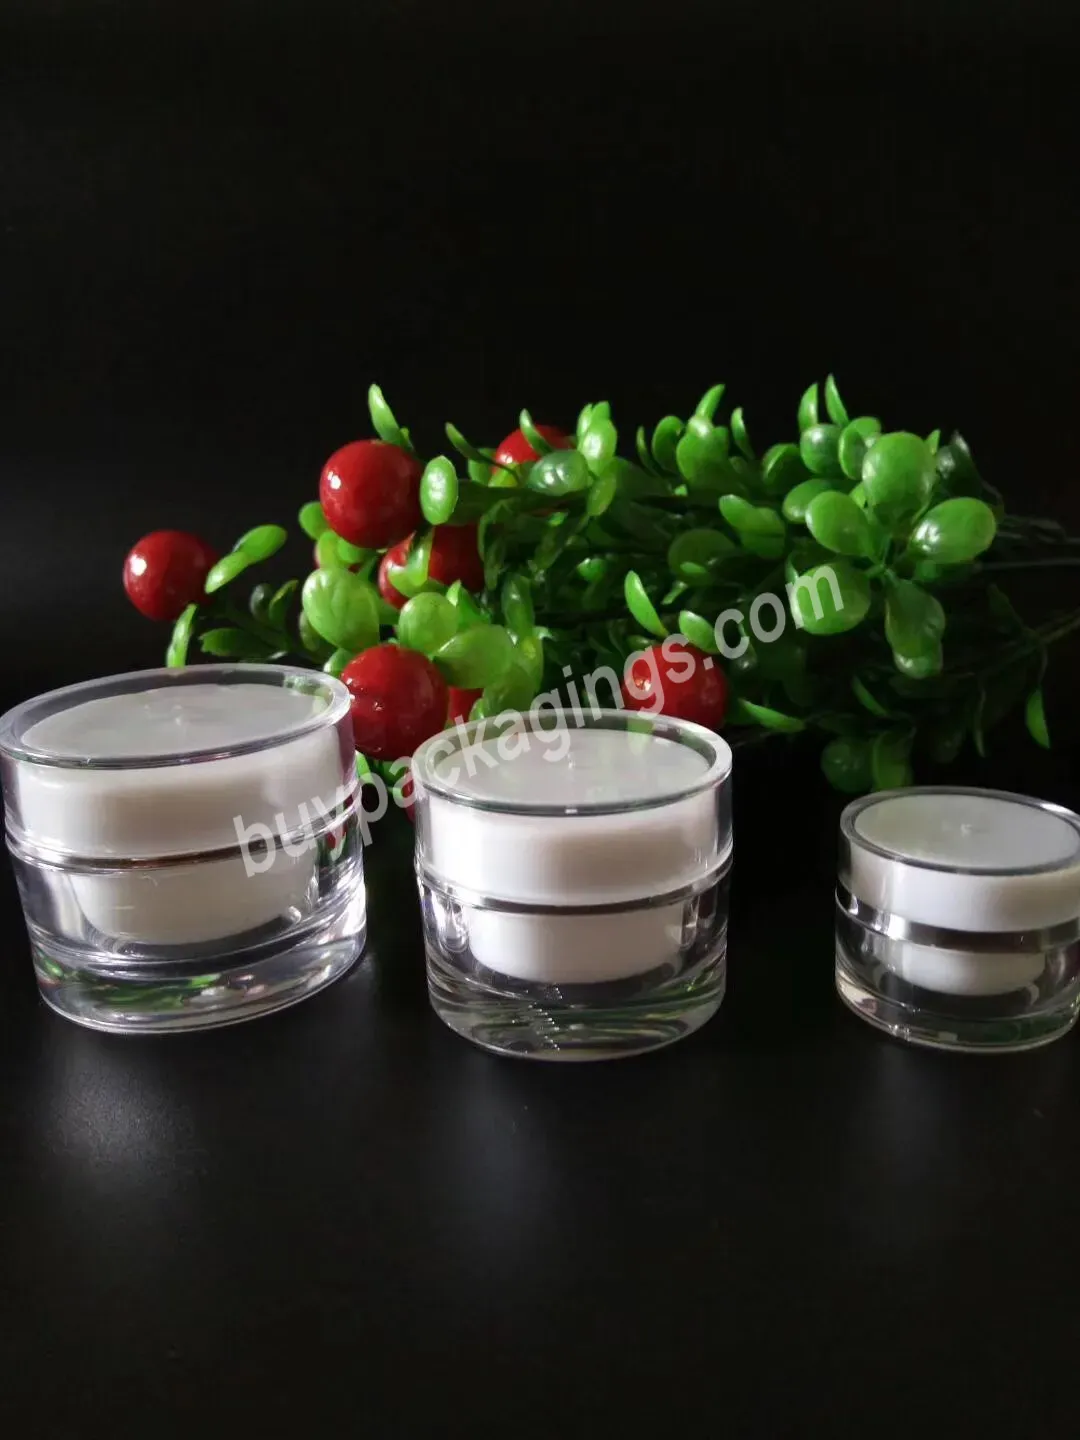 Lady Cosmetic Bottle Series 30g 50g / 30ml 50ml 100ml Acrylic Round Face Cream Jar / Airless Lotion Bottle - Buy 100g Acrylic Jars For Cosmetics,High Quality Acrylic Jar Skin Care Cream Jar,50ml Cosmetics Cream Empty Jar.